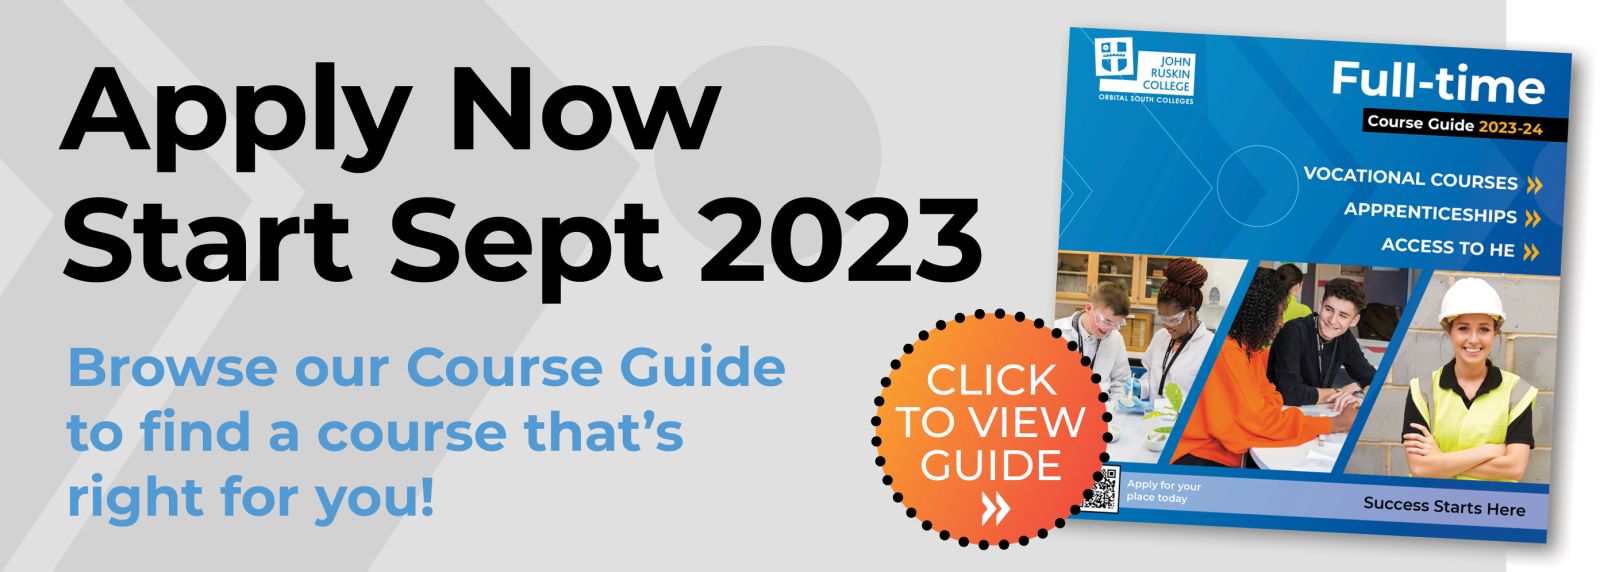 Apply now, Start September 2023 - Browse our Course Guide to find a course that's right for you!